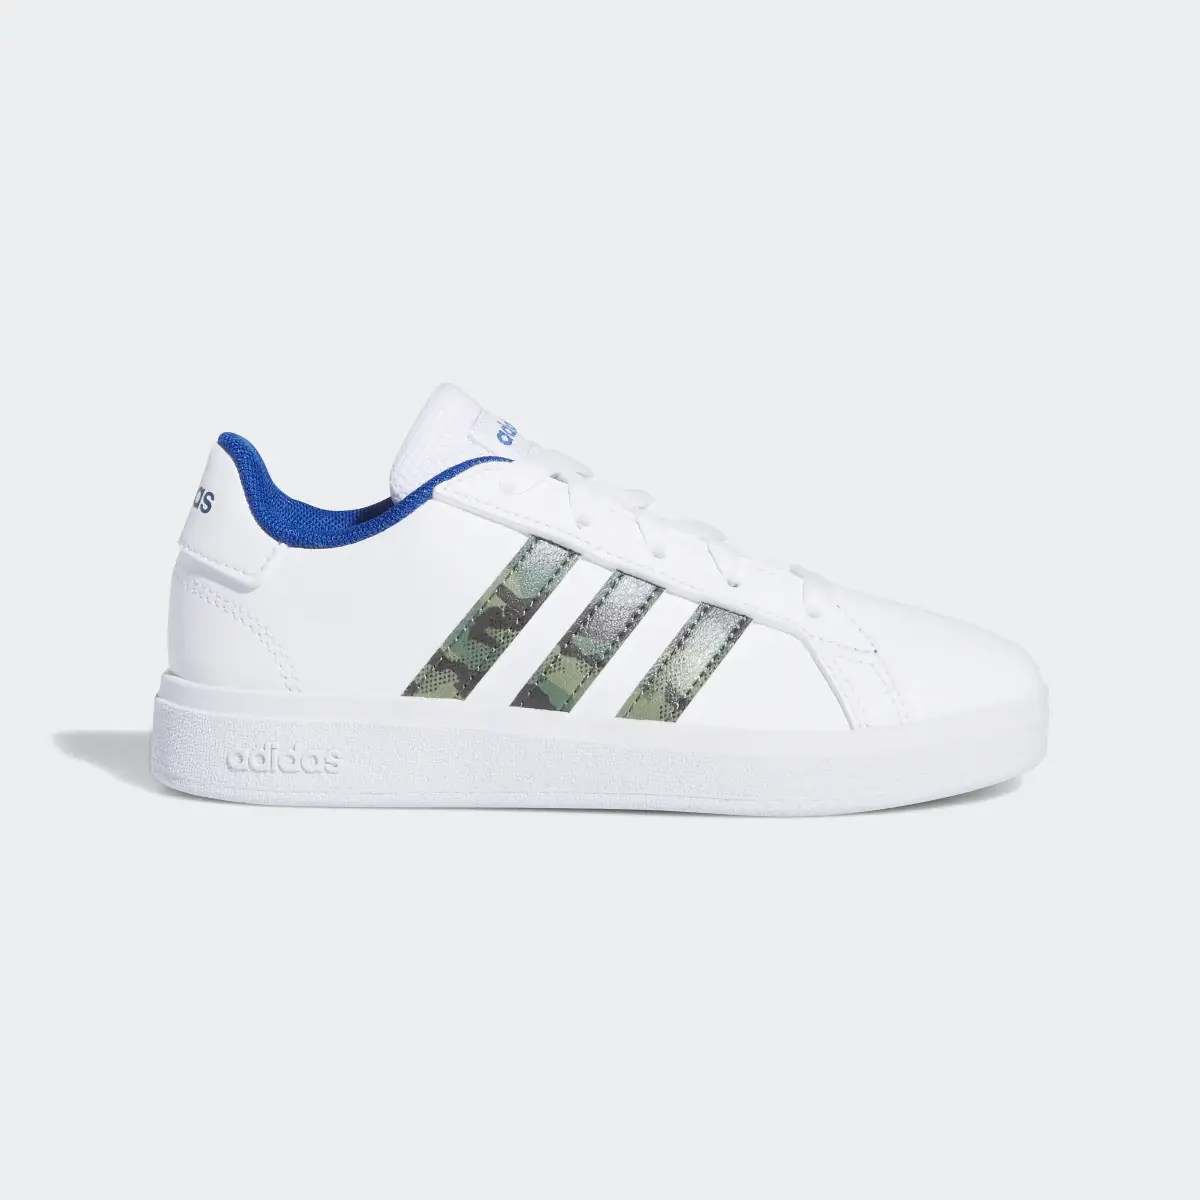 Adidas Grand Court Lifestyle Lace Tennis Schuh. 2